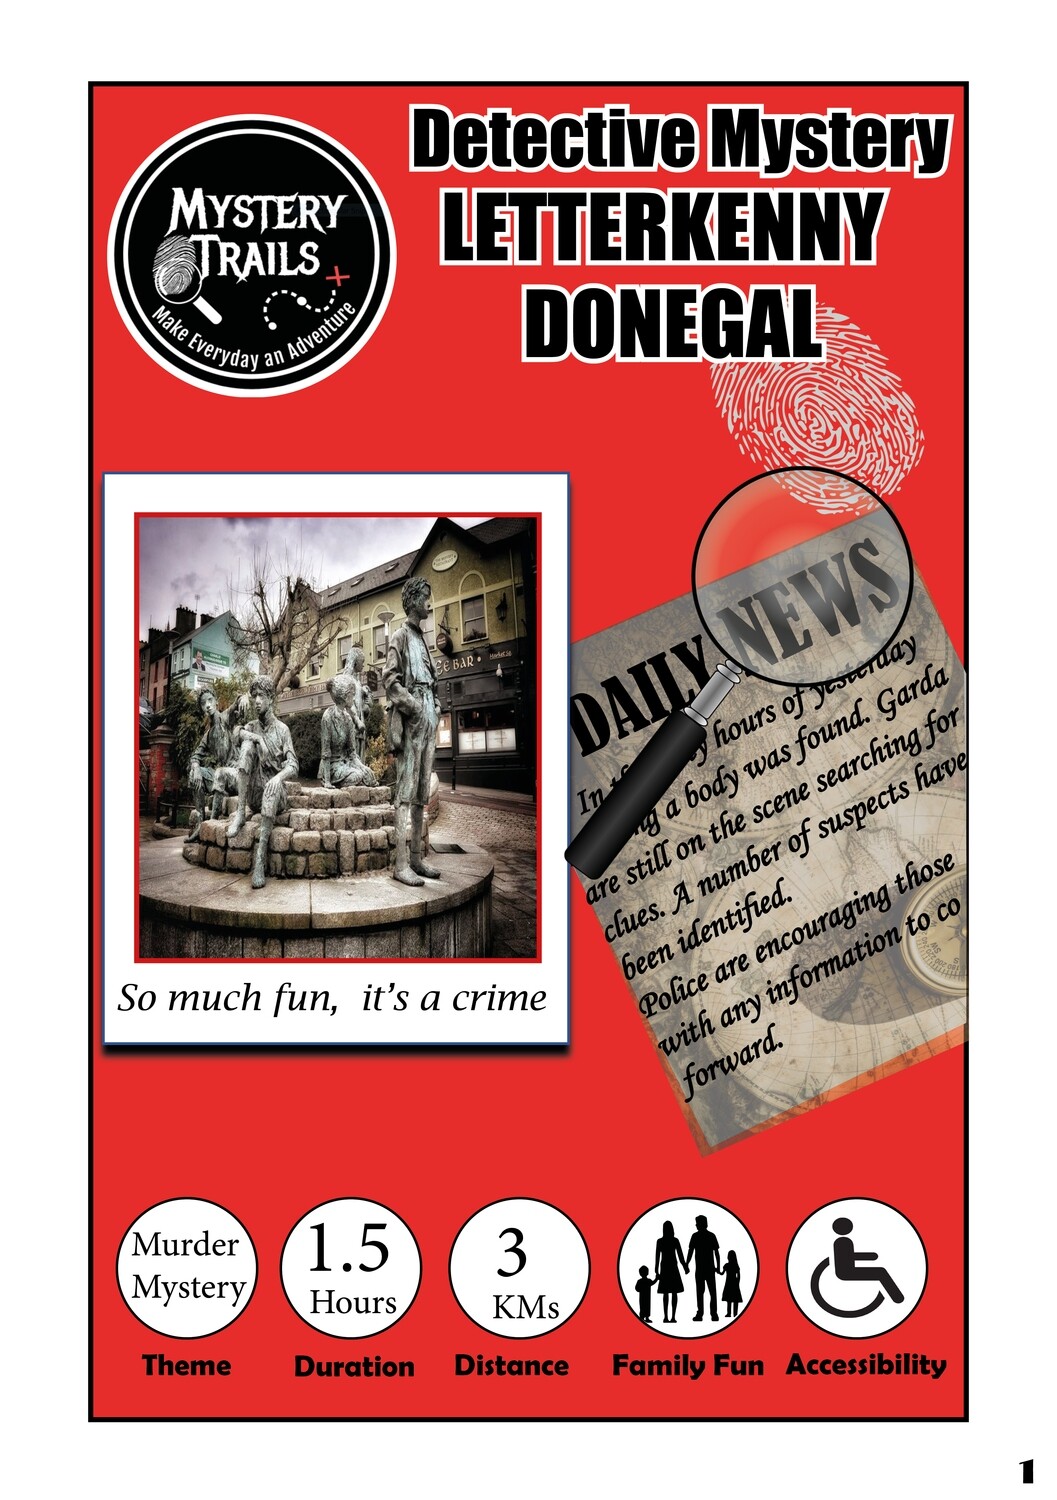 Letterkenny- Detective Mystery- Donegal